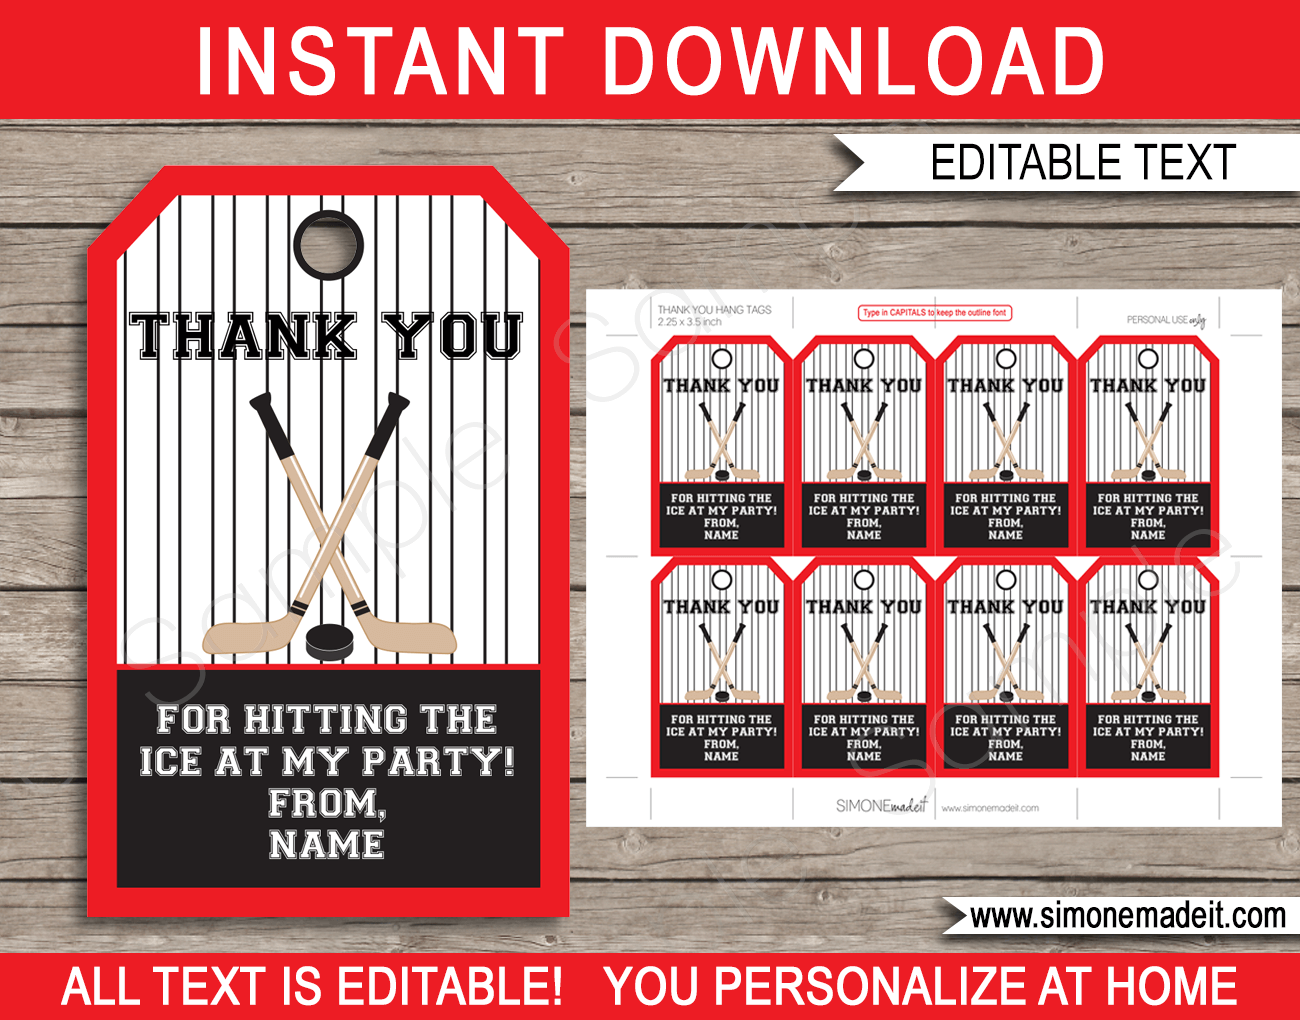 Hockey Birthday Party Favor Tags | Thank You Tags | Editable DIY Template | $3.00 INSTANT DOWNLOAD via SIMONEmadeit.com